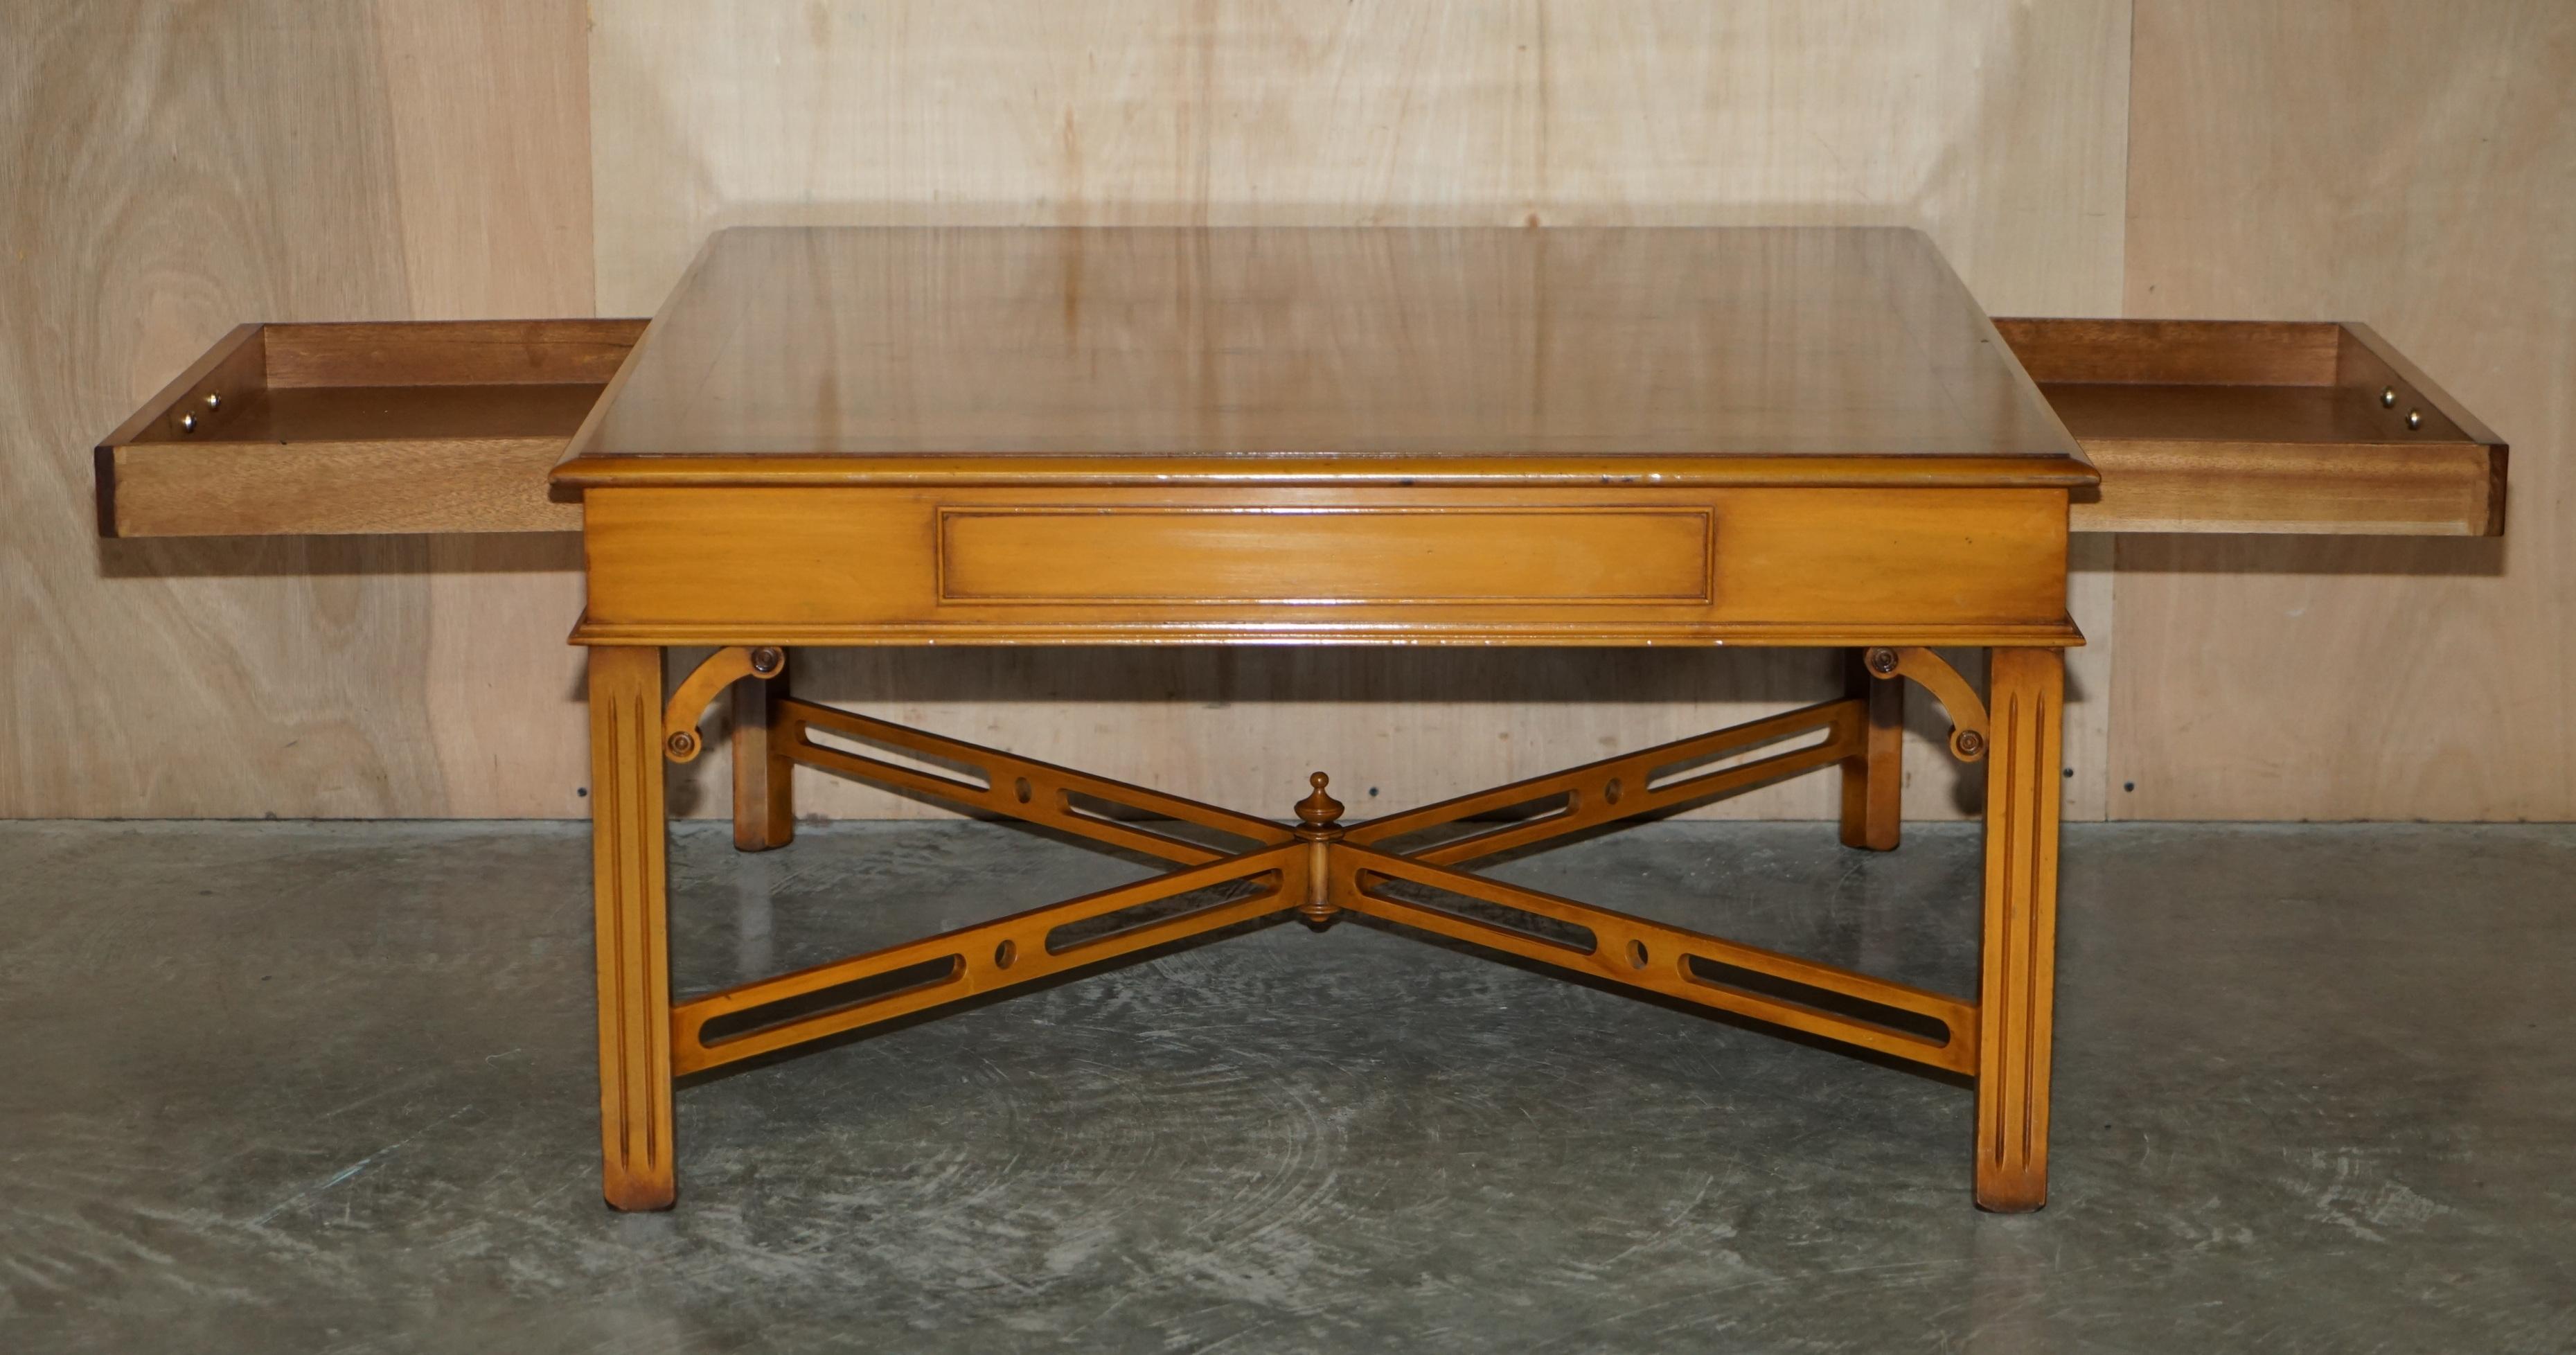 LOVELY BURR YEW WOOD TWO DRAWER COFFEE TABLE WiTH THOMAS CHIPPENDALE STRETCHES im Angebot 10